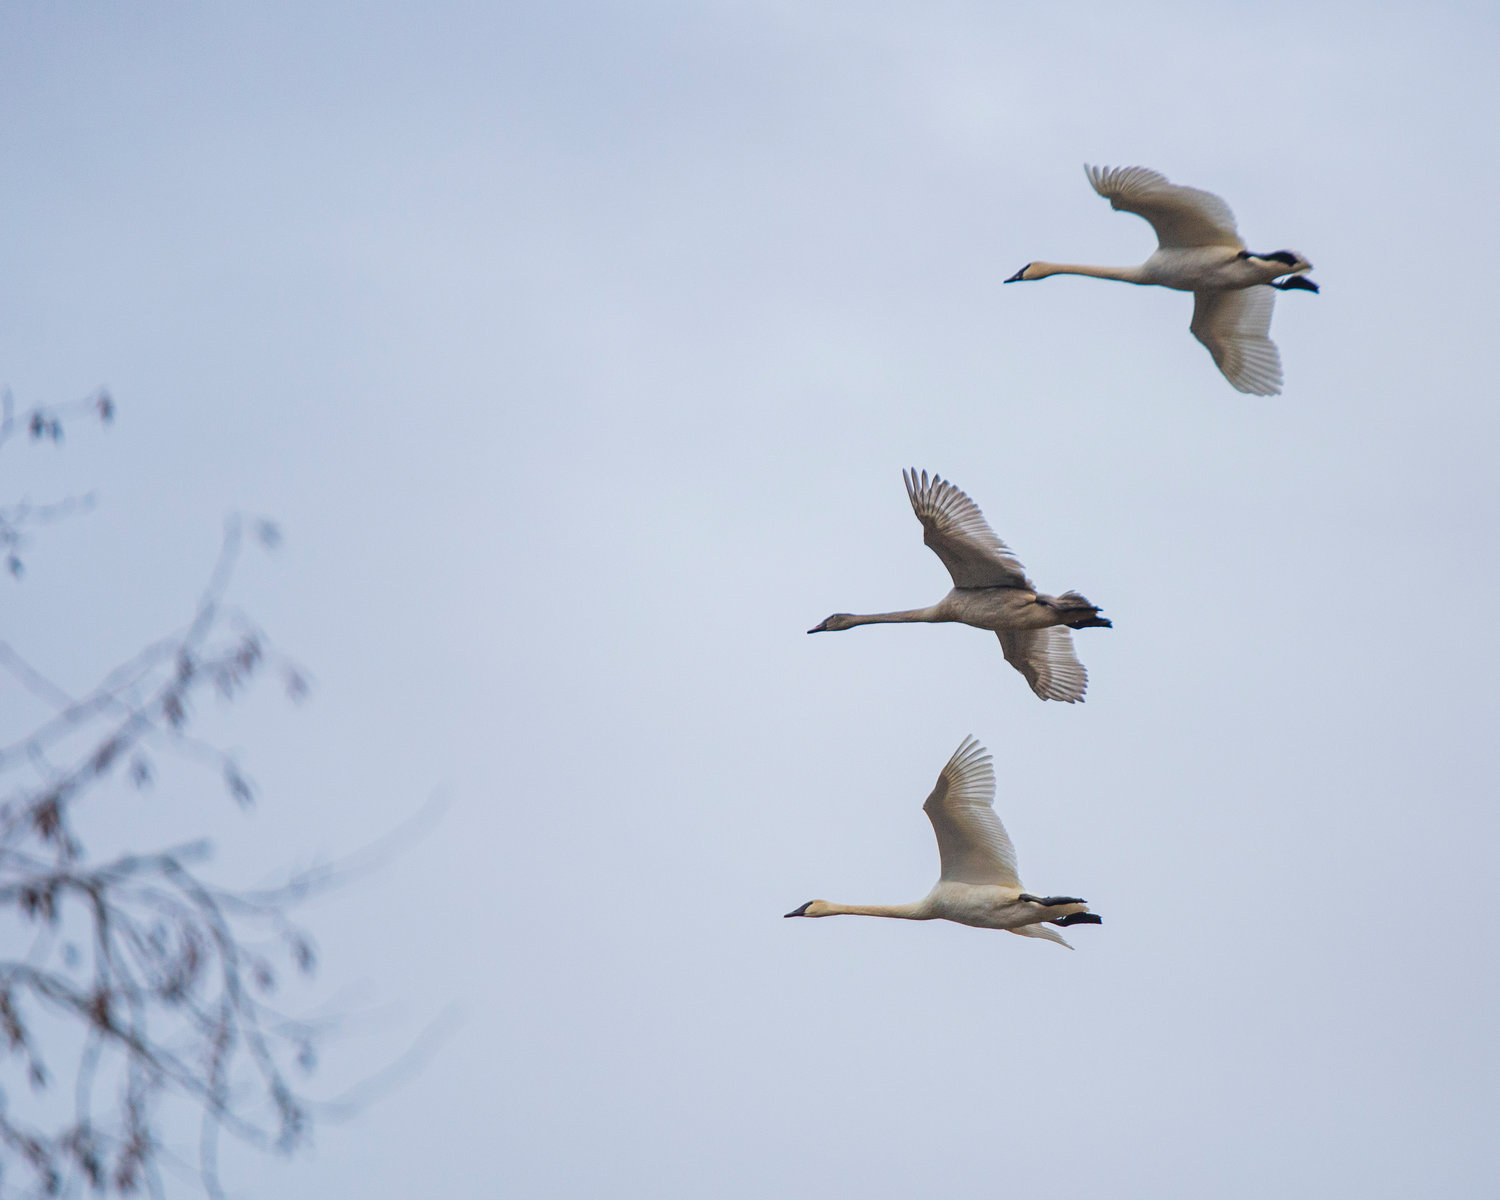 Two adult trumpeter swans are joined by a juvenile in flight over the Willapa Hills Trail in Chehalis on Saturday afternoon. The group is likely to be two parents and their baby.